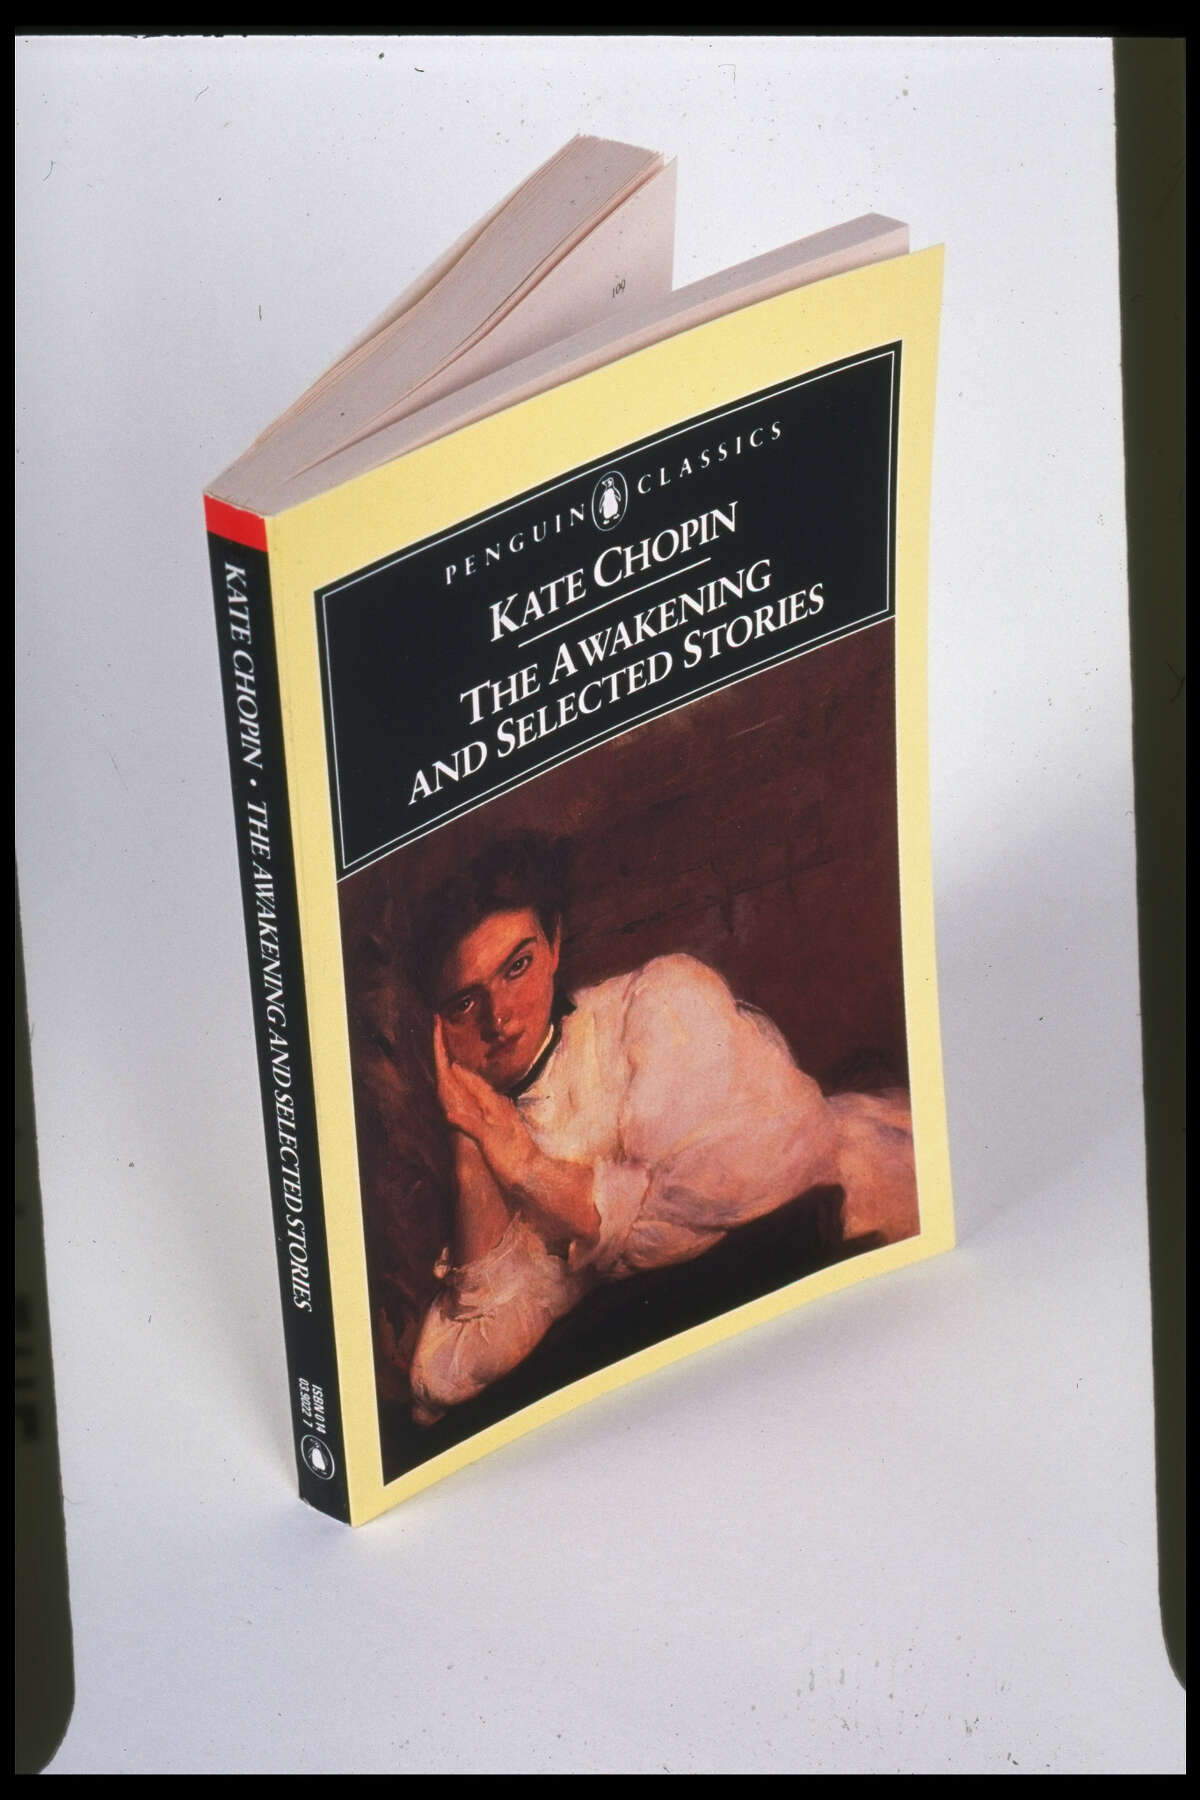 Paperback edition of Kate Chopin's THE AWAKENING AND SELECTED STORIES. (Photo by Jay Colton/The LIFE Images Collection via Getty Images/Getty Images)